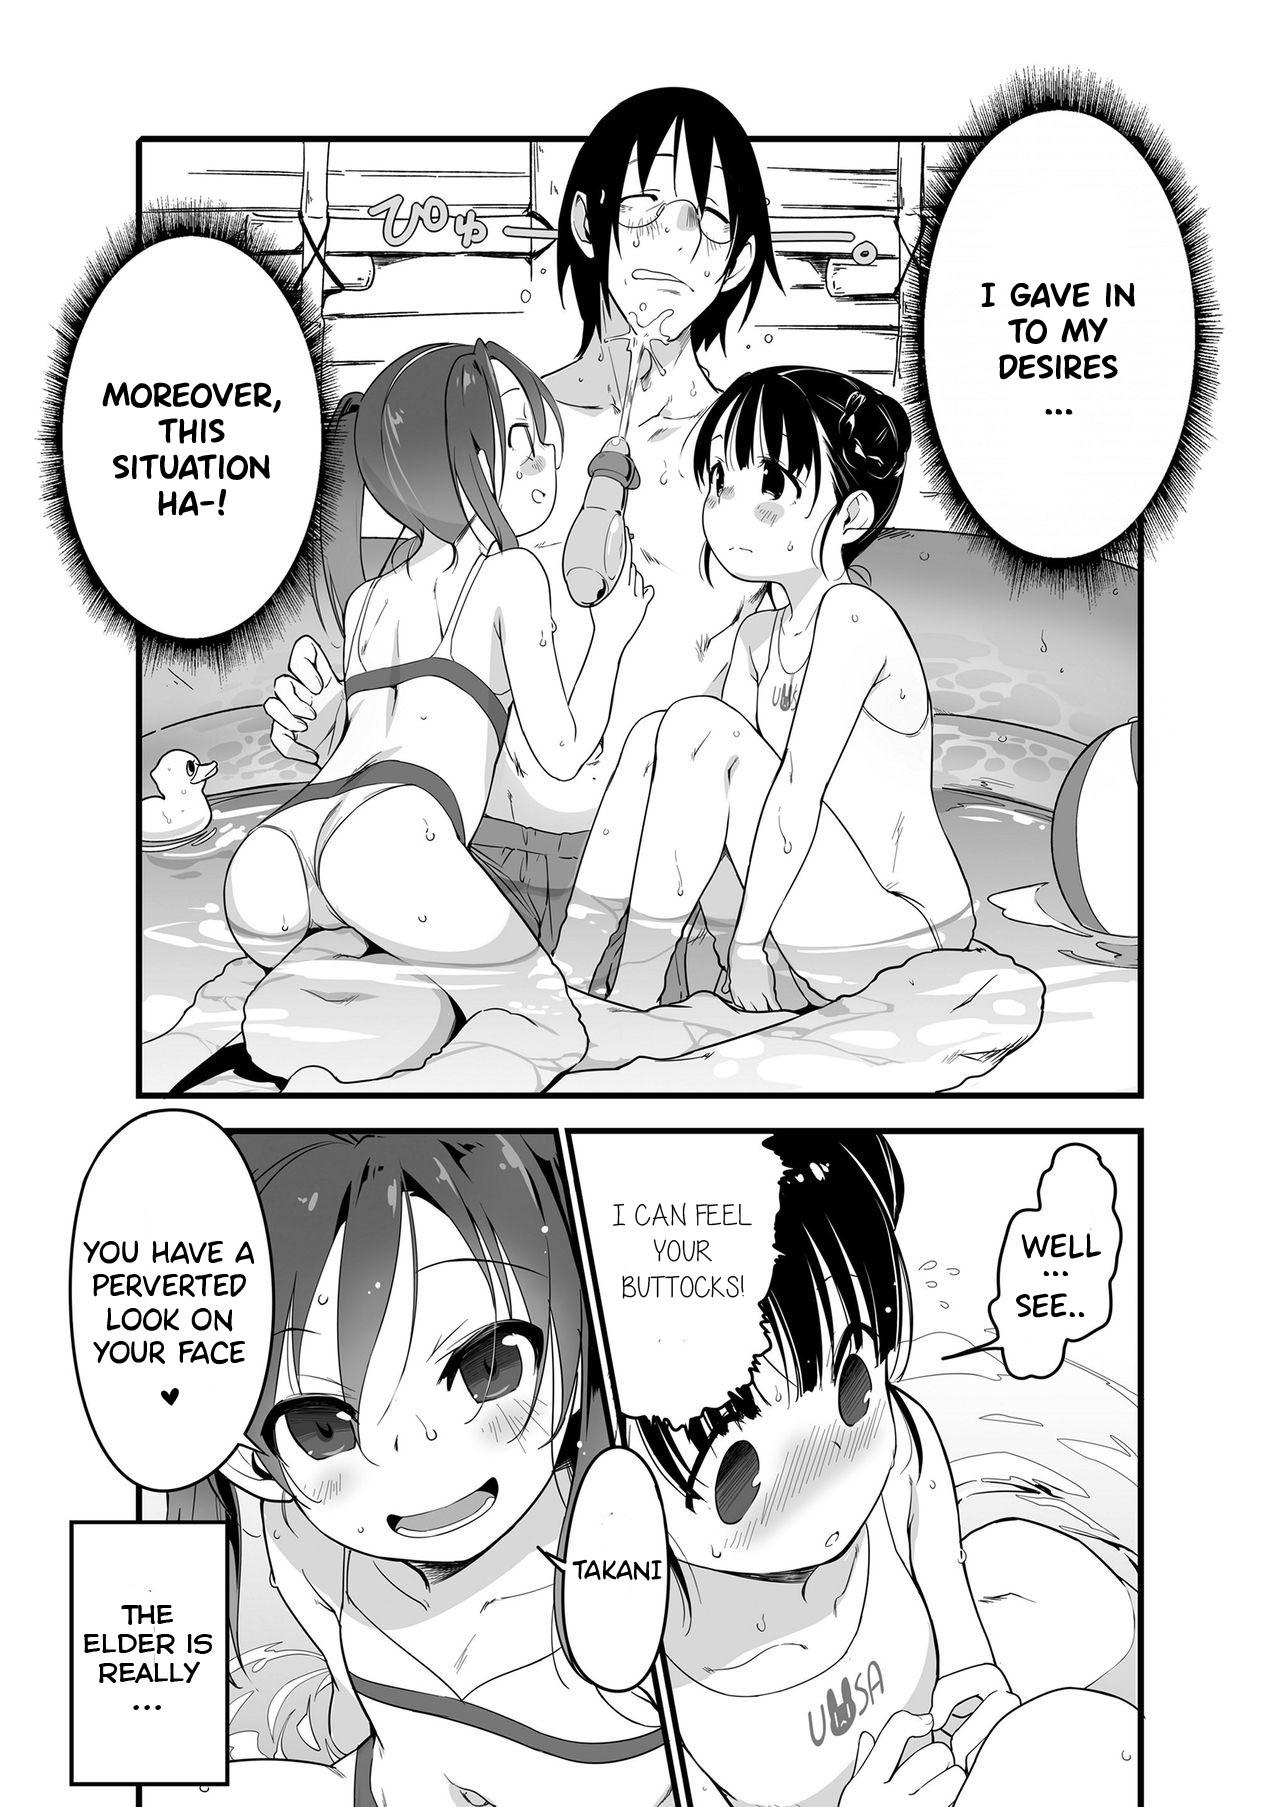 Sofa Uchiage Hanabi, Ane to Miruka? Imouto to Miruka? | Fireworks, Should we see it with the elder sister or the younger sister? Blondes - Page 6